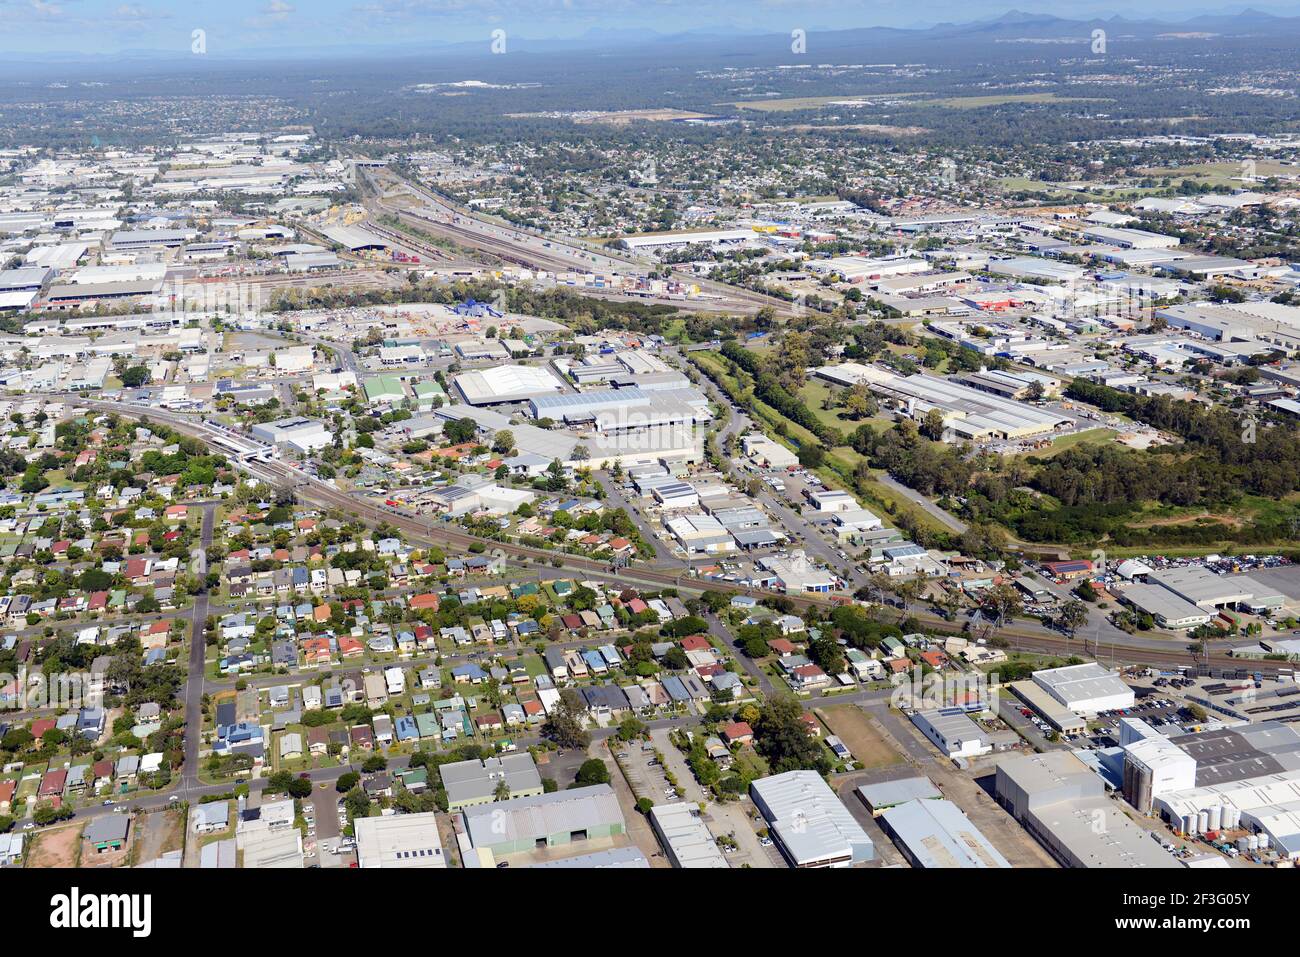 Aerial view of the industrial and distribution centres in Rocklea, Queensland, Australia. Stock Photo